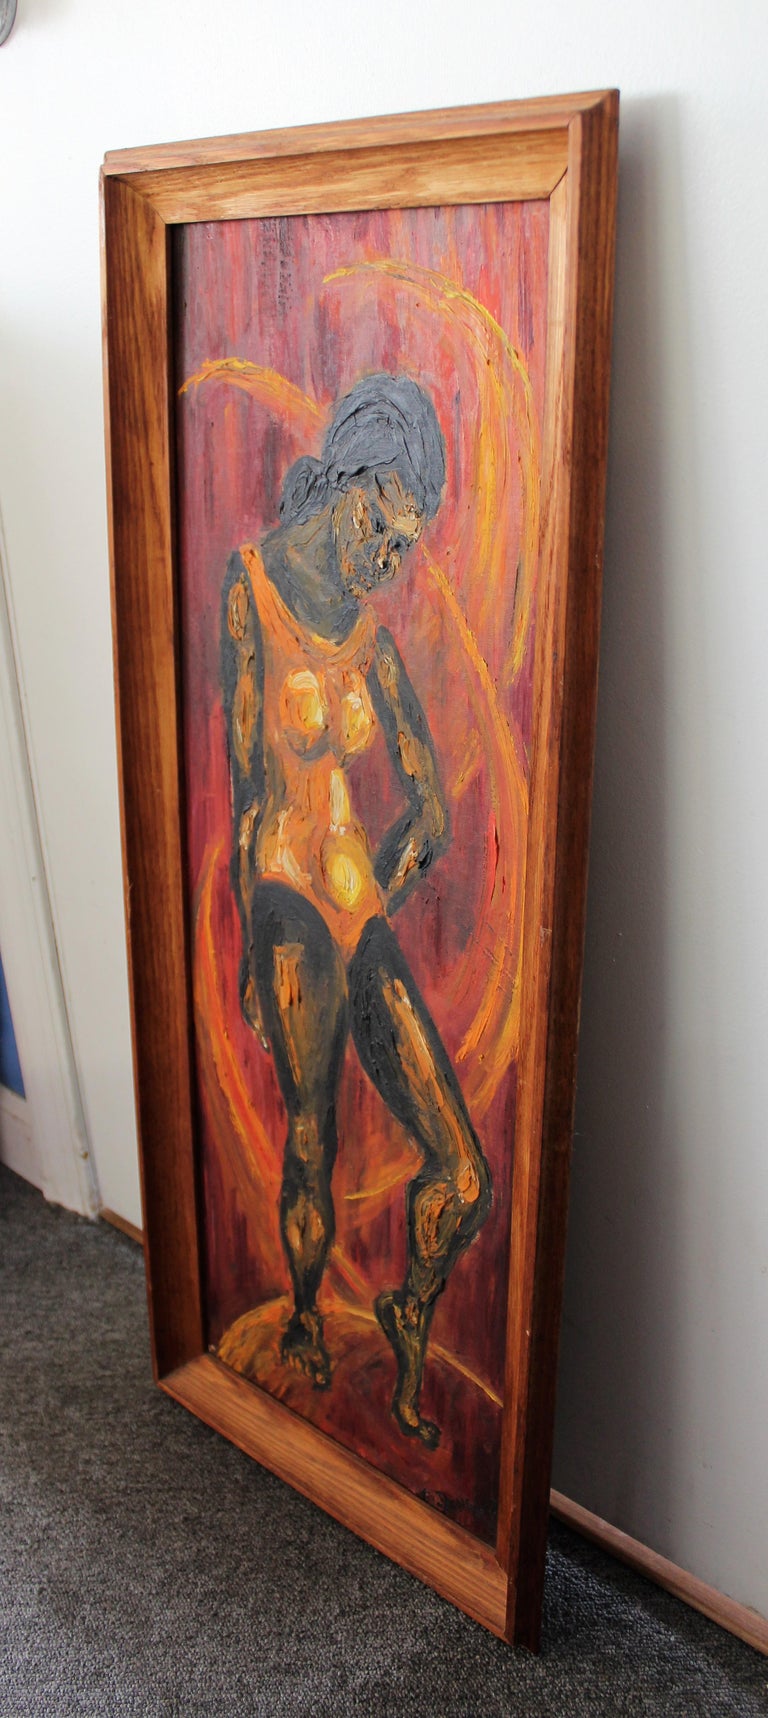 Offered is a vintage modern abstract oil painting of a woman on canvas, signed by Candy Dengler. The wooden frame shows some age wear, but the painting itself is intact and in good condition. We do not have any additional info on the artist. We're